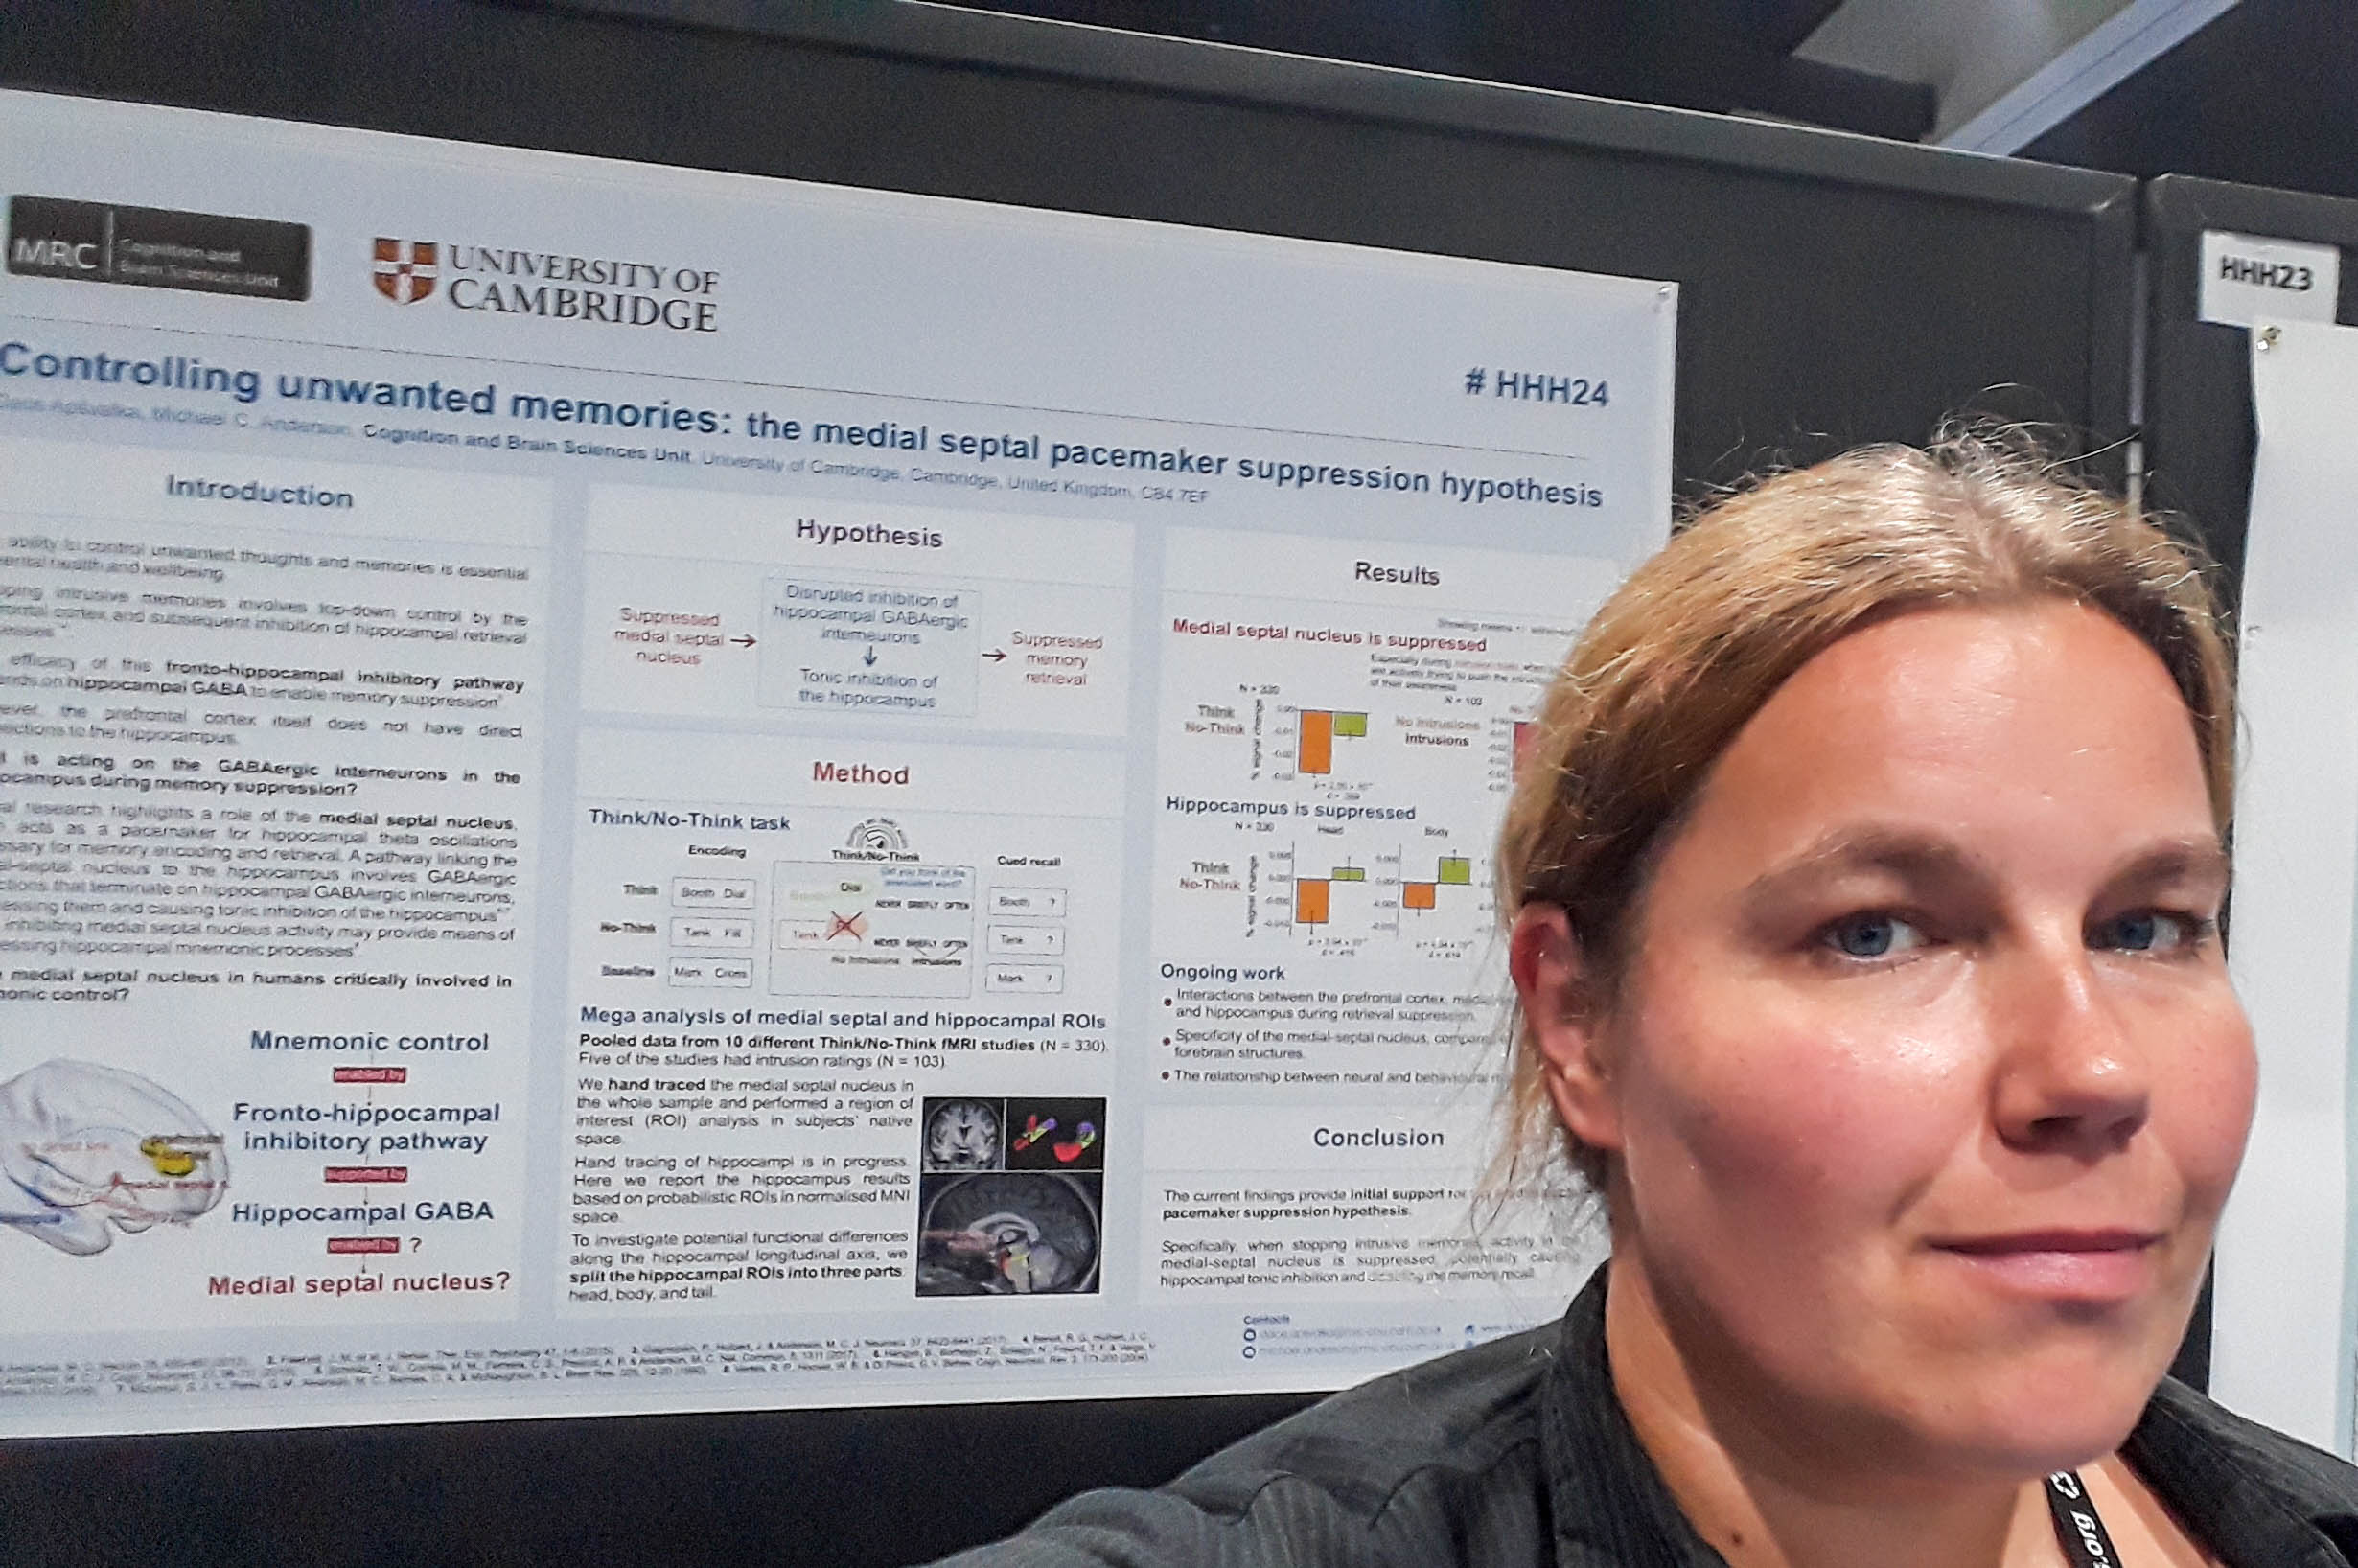 i-am-presenting-a-poster-at-the-society-for-neuroscience-sfn-meeting